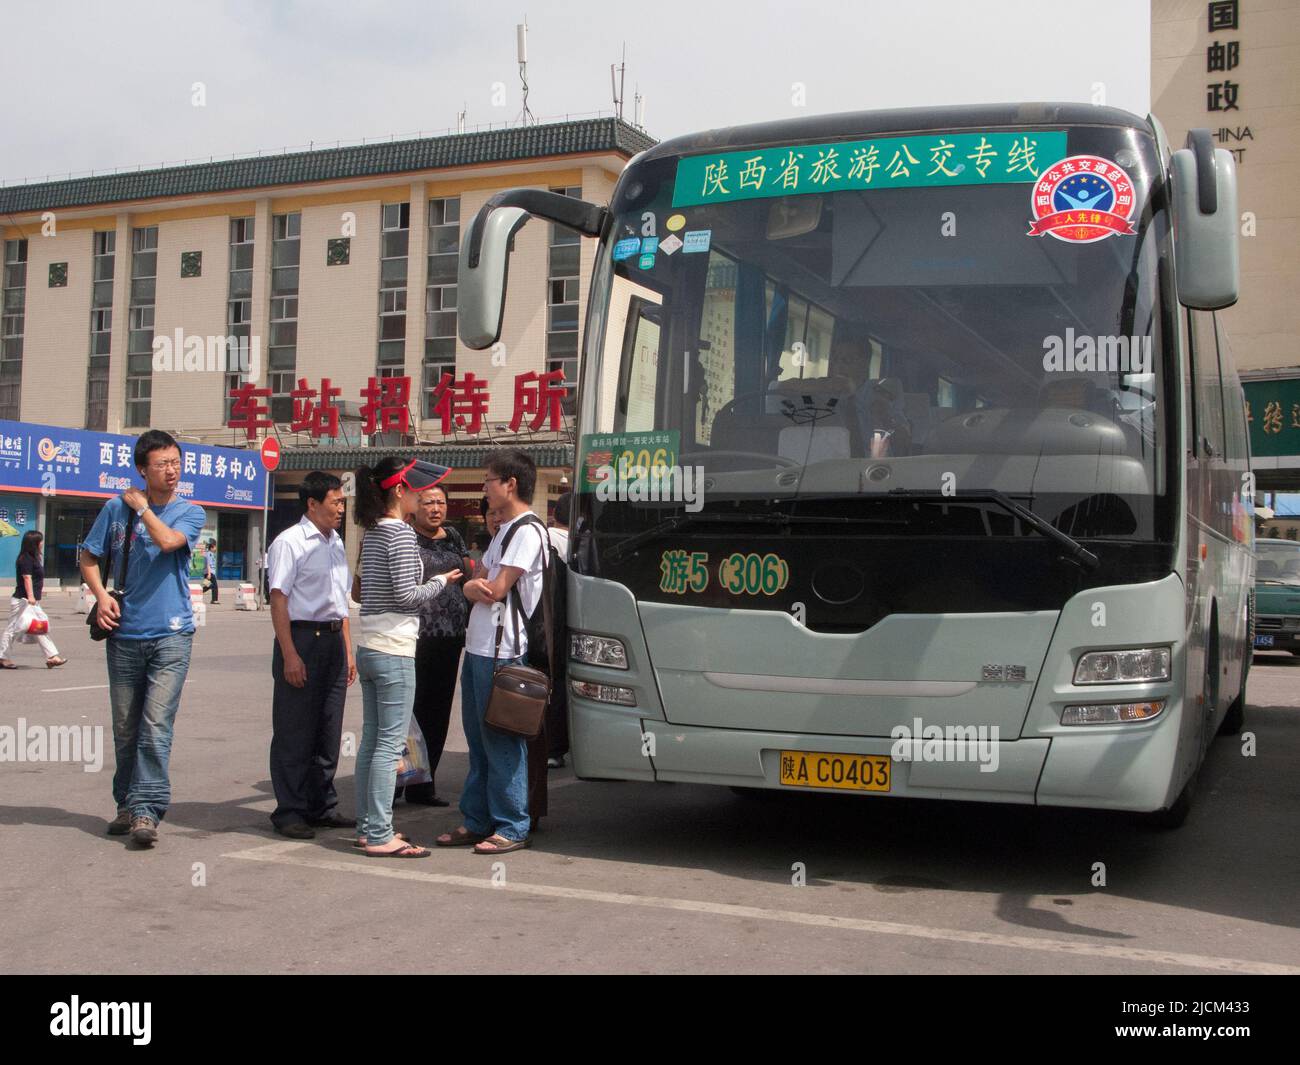 Bus Number 306 / buses / coach / coaches waiting for passengers to embark before commencing travel from bus station stop in the City of Xi'an, PRC, China. (125) Stock Photo